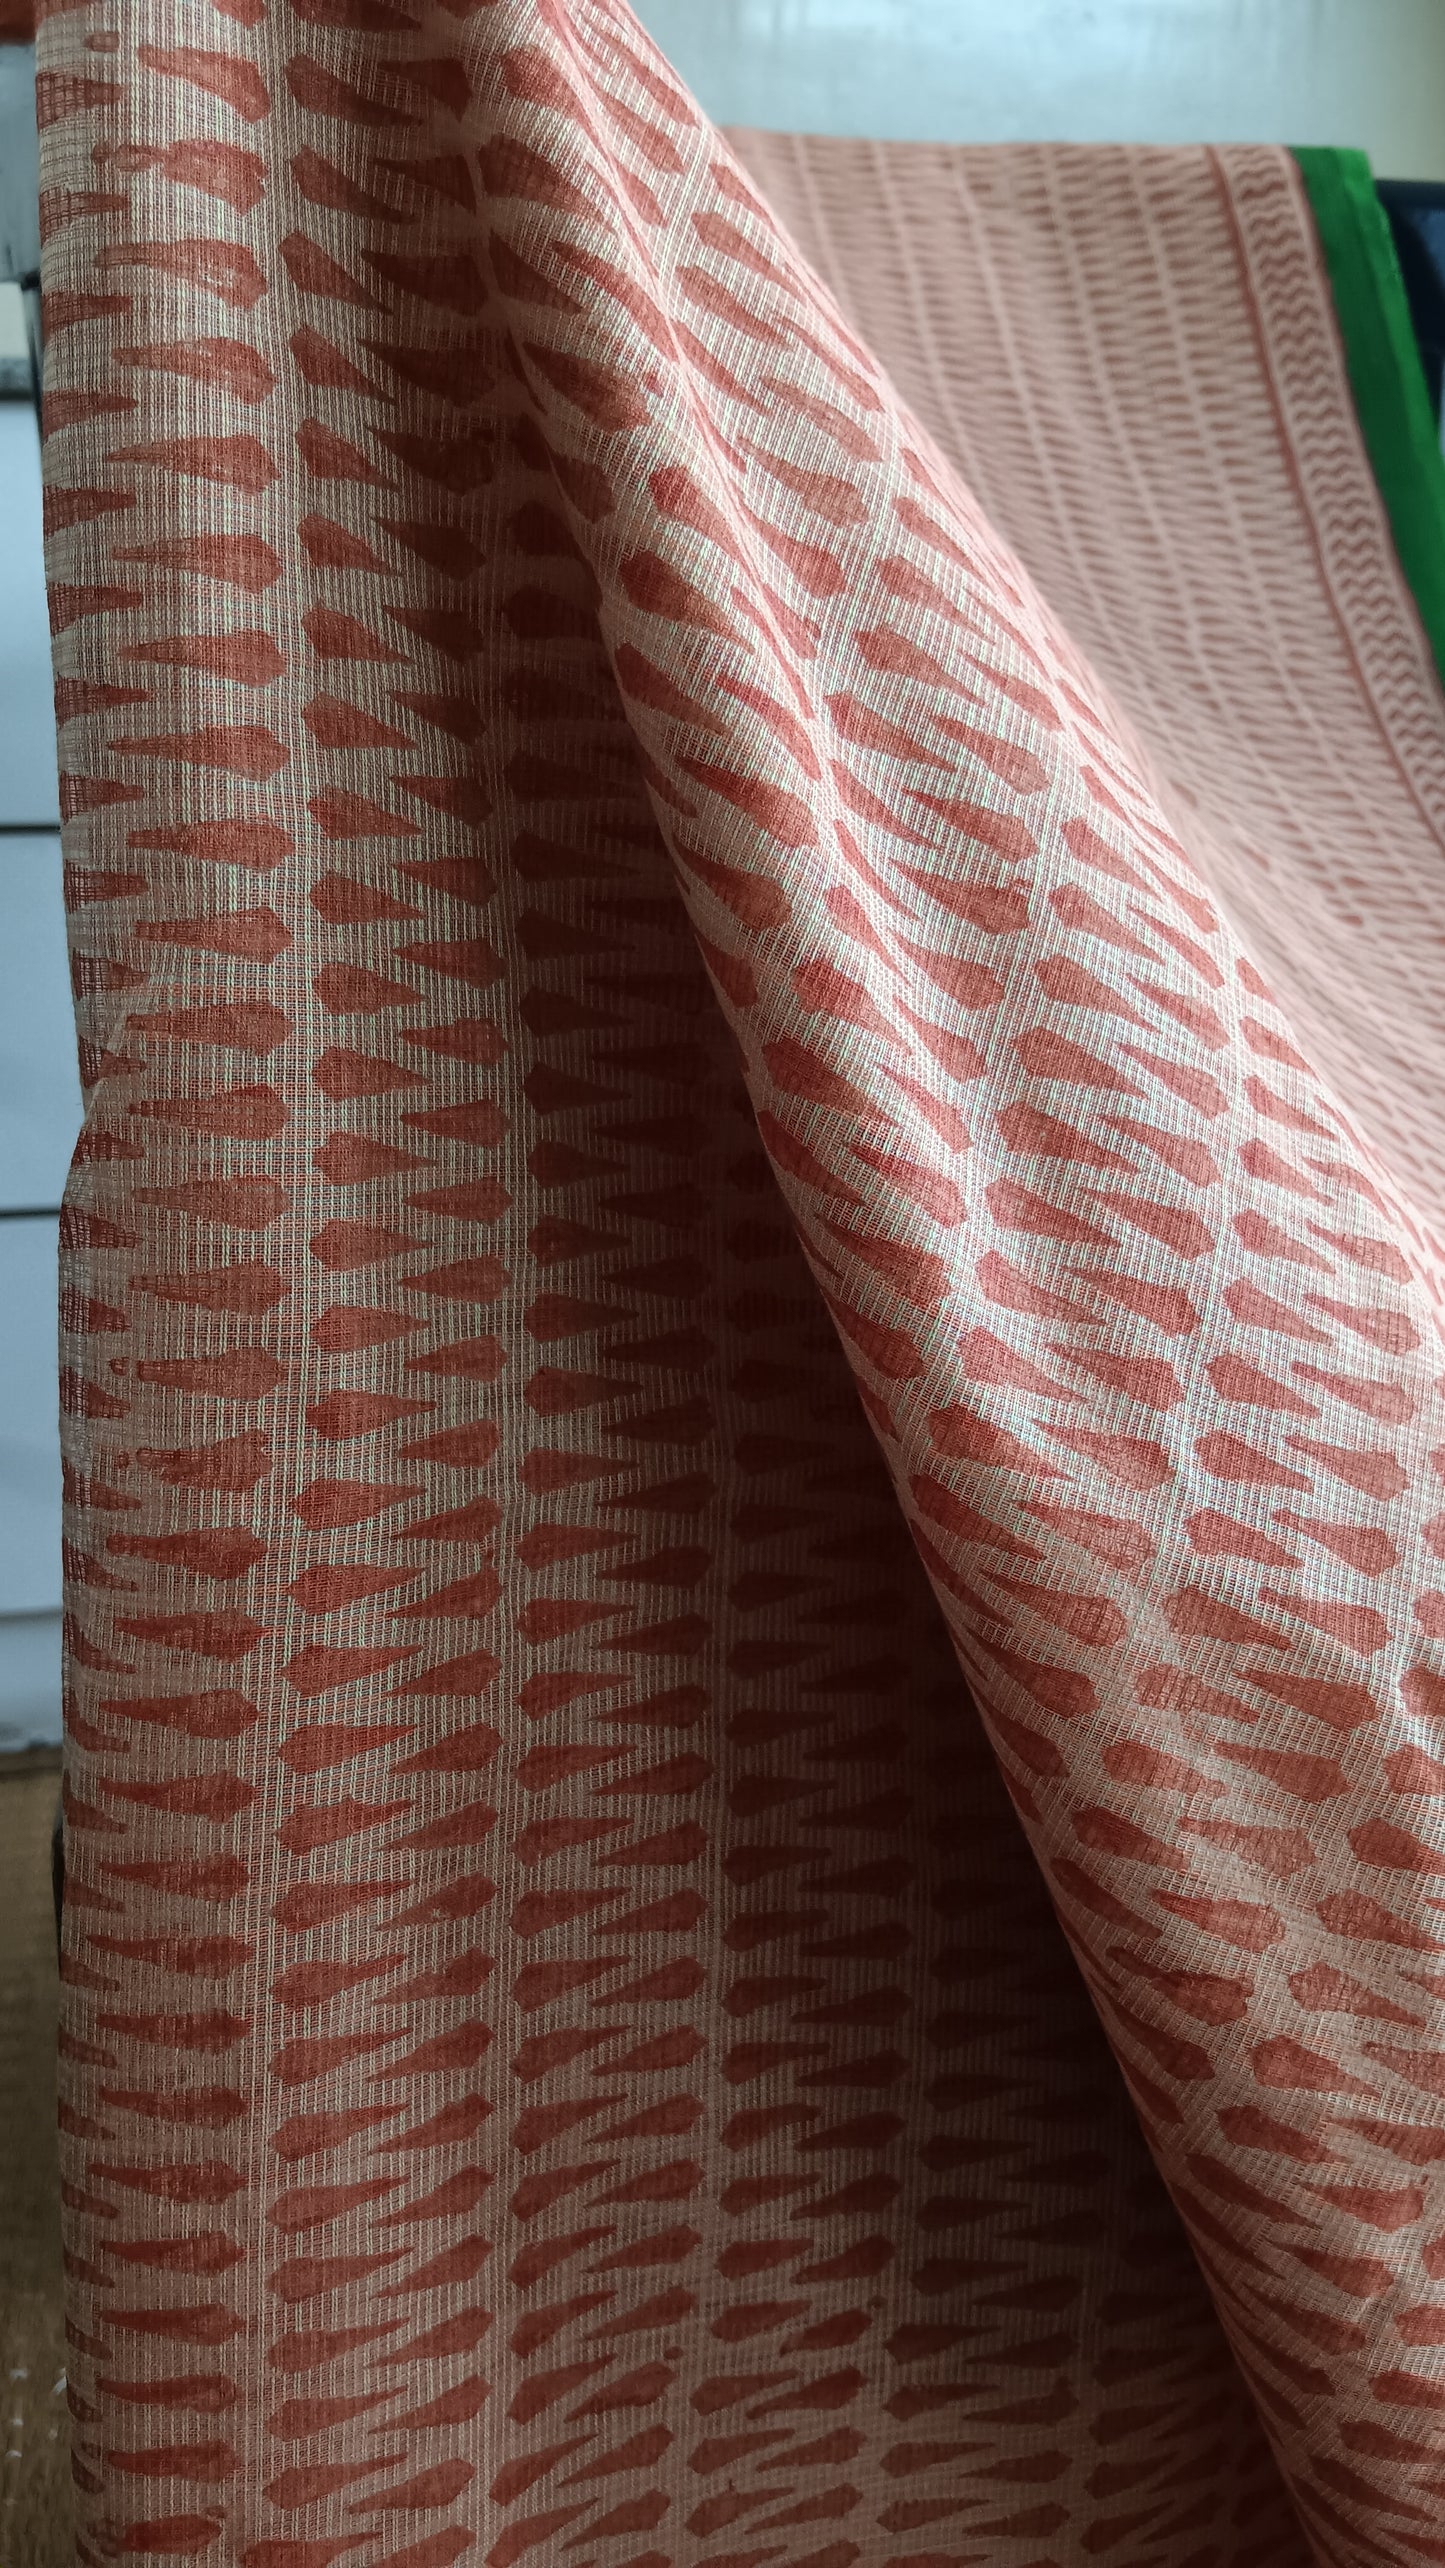 Close up view of the geometric pattern block printed on the daily wear kota cotton saree